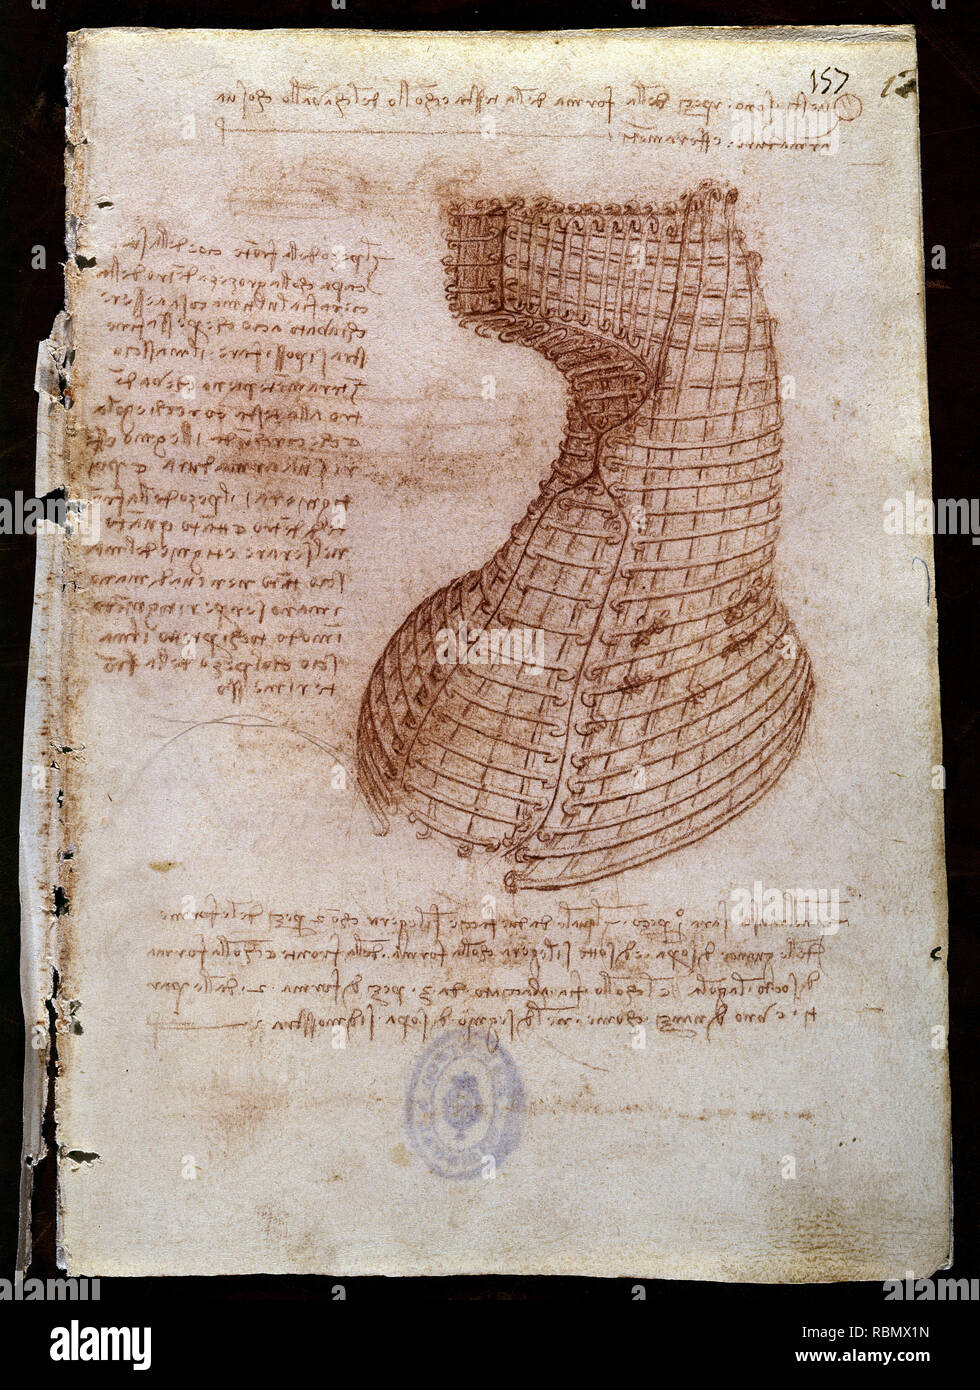 cheap Subsidy payment Page from a codex. Drawing of a horse-shaped structure. Ordered by Sforzza.  1490. Madrid, National Library. Author: LEONARDO DA VINCI. Location:  BIBLIOTECA NACIONAL-COLECCION. MADRID. SPAIN Stock Photo - Alamy